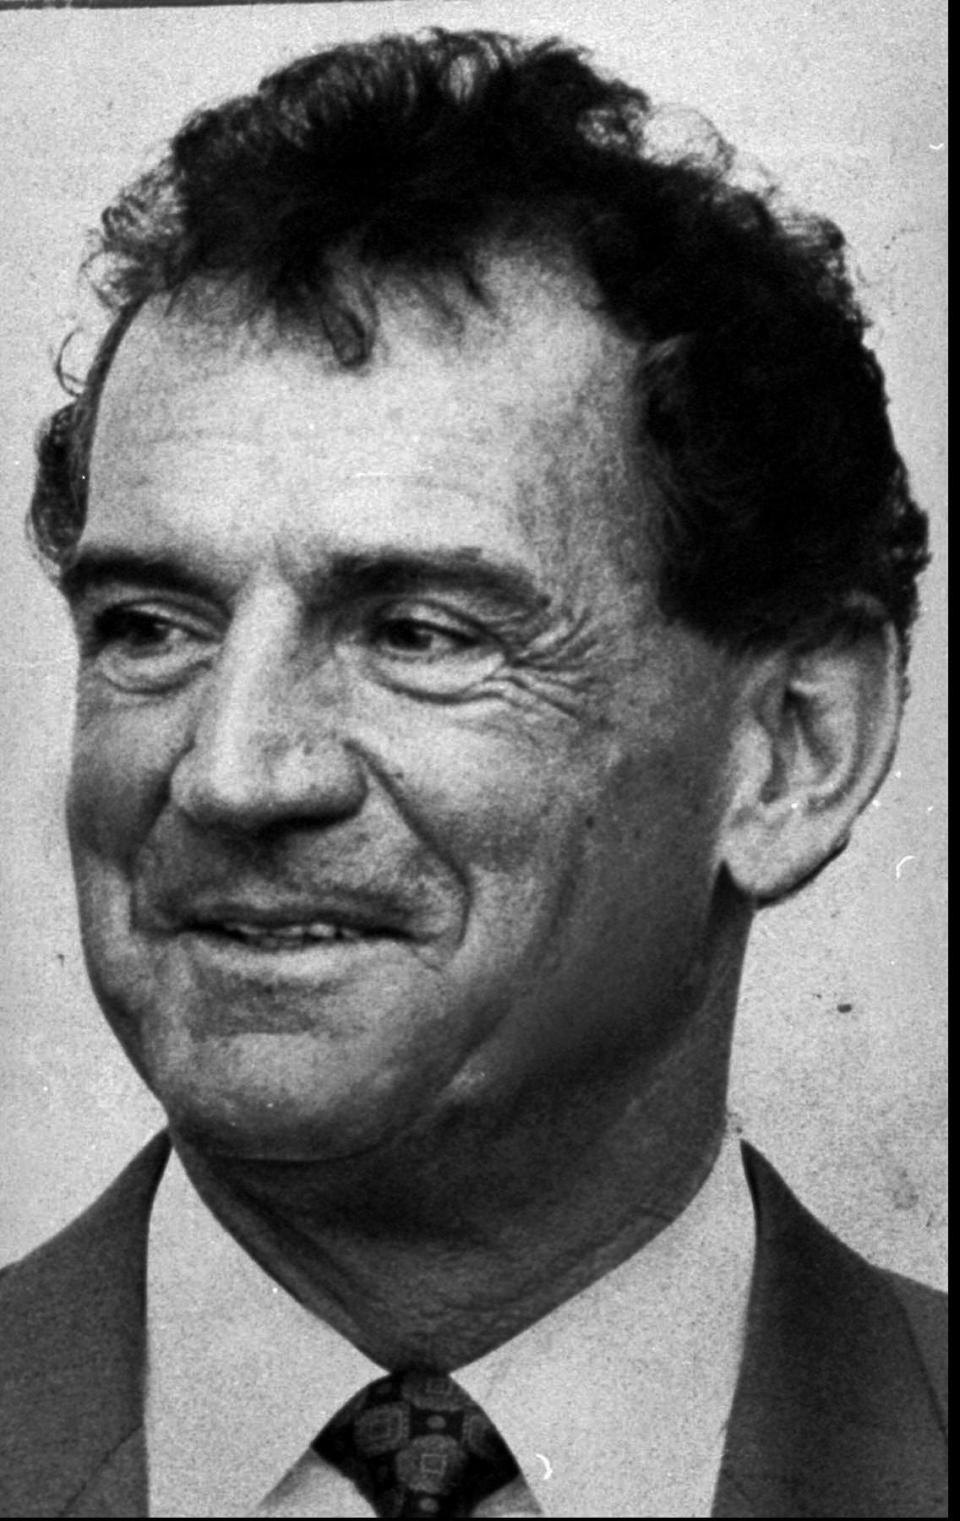 Reputed Boston mobster Francis P. "Cadillac" Salemme is shown in this1993 file photo. Federal prosecuters claim that Bulger was an FBI informant offering law enforcement authorities tips about the Mafia in New England.